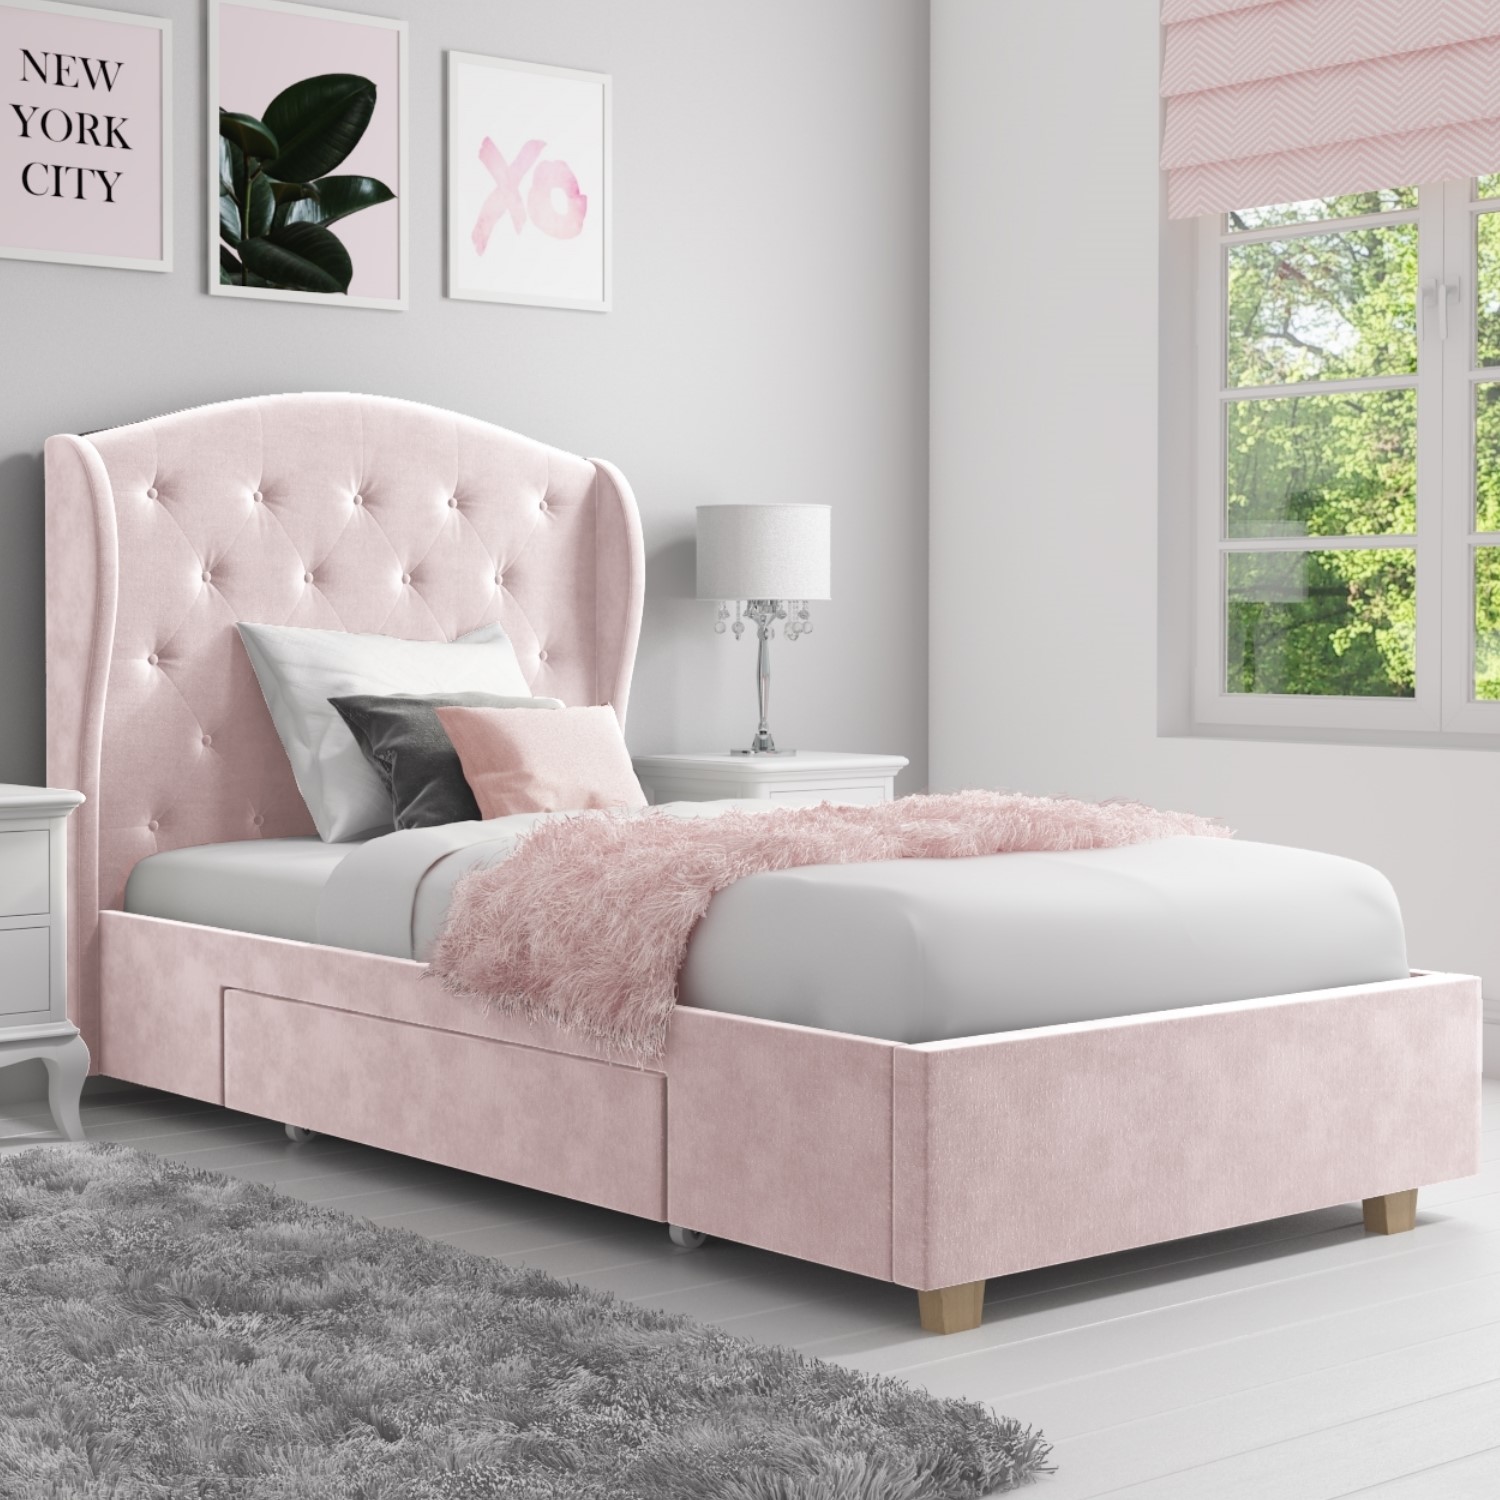 baby pink bed frame